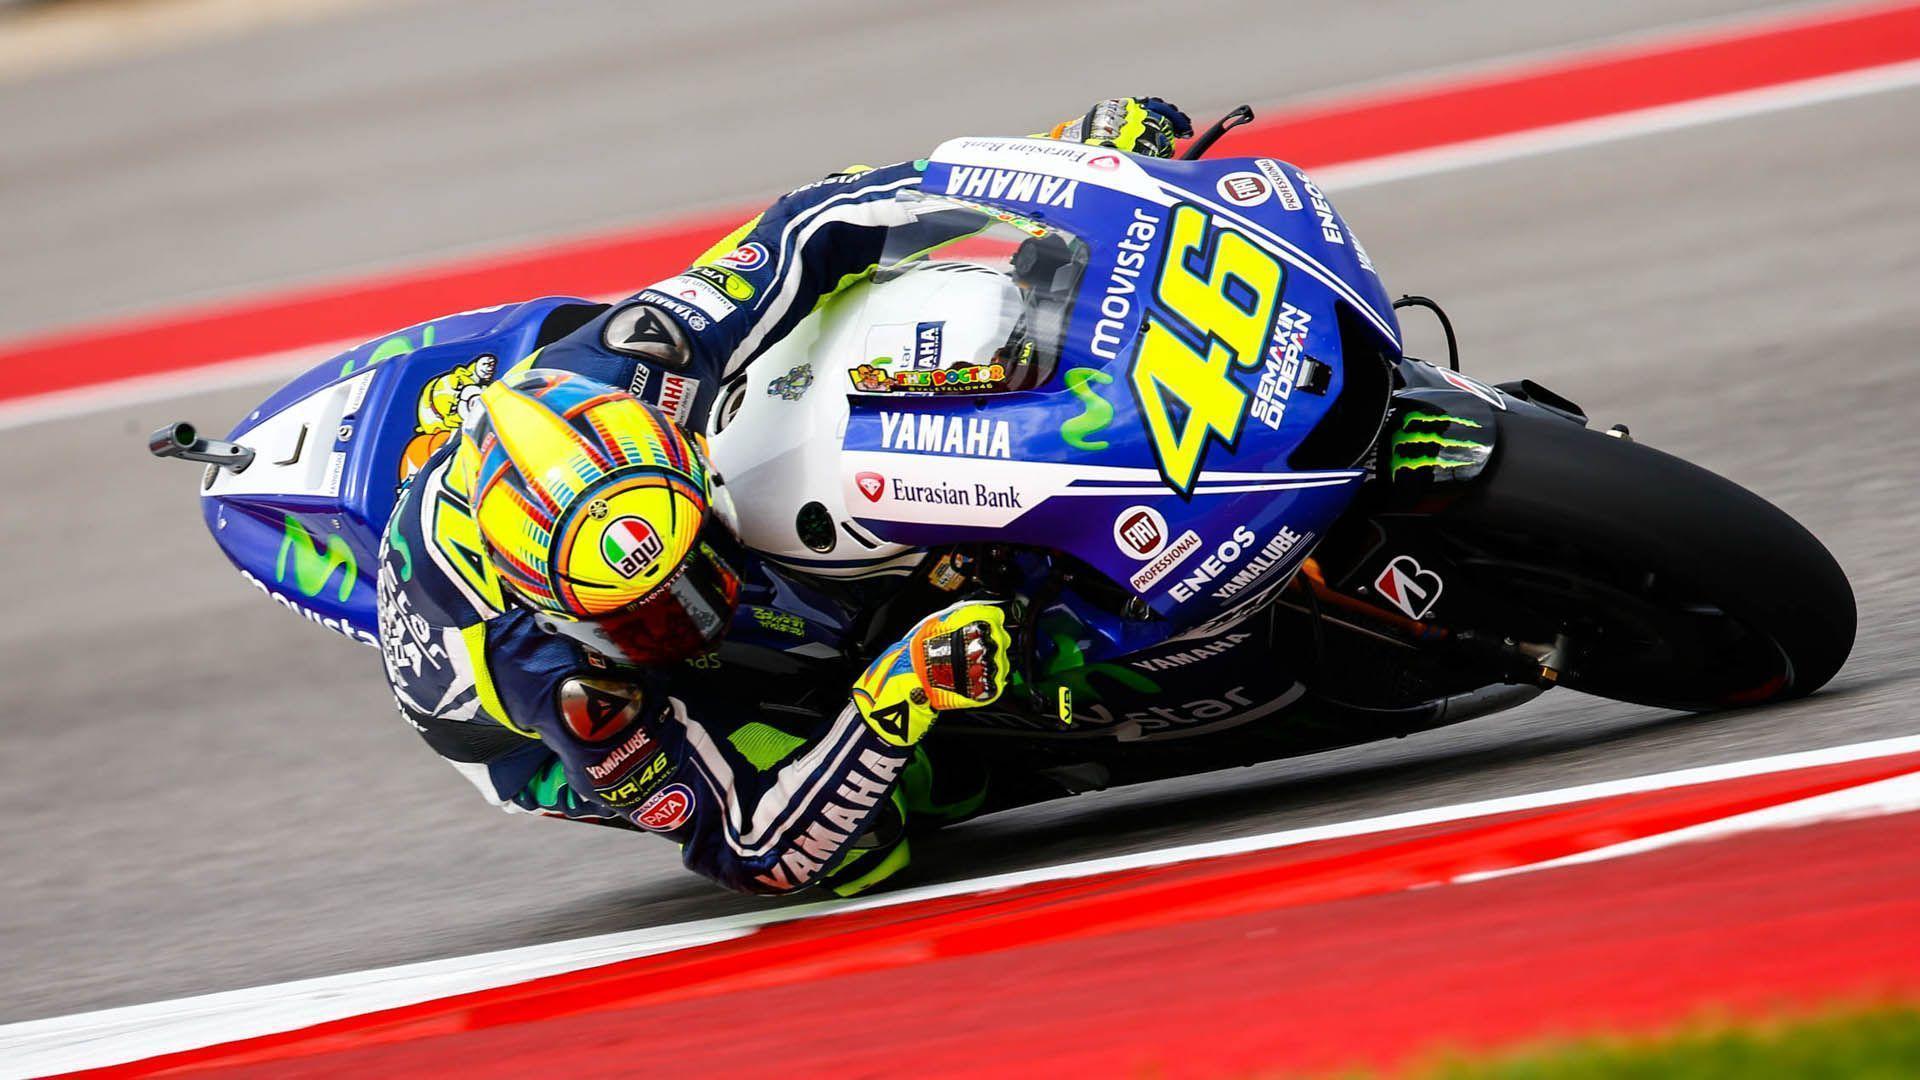 Wallpaper valentino rossi news 2016 and behlul wallpaper